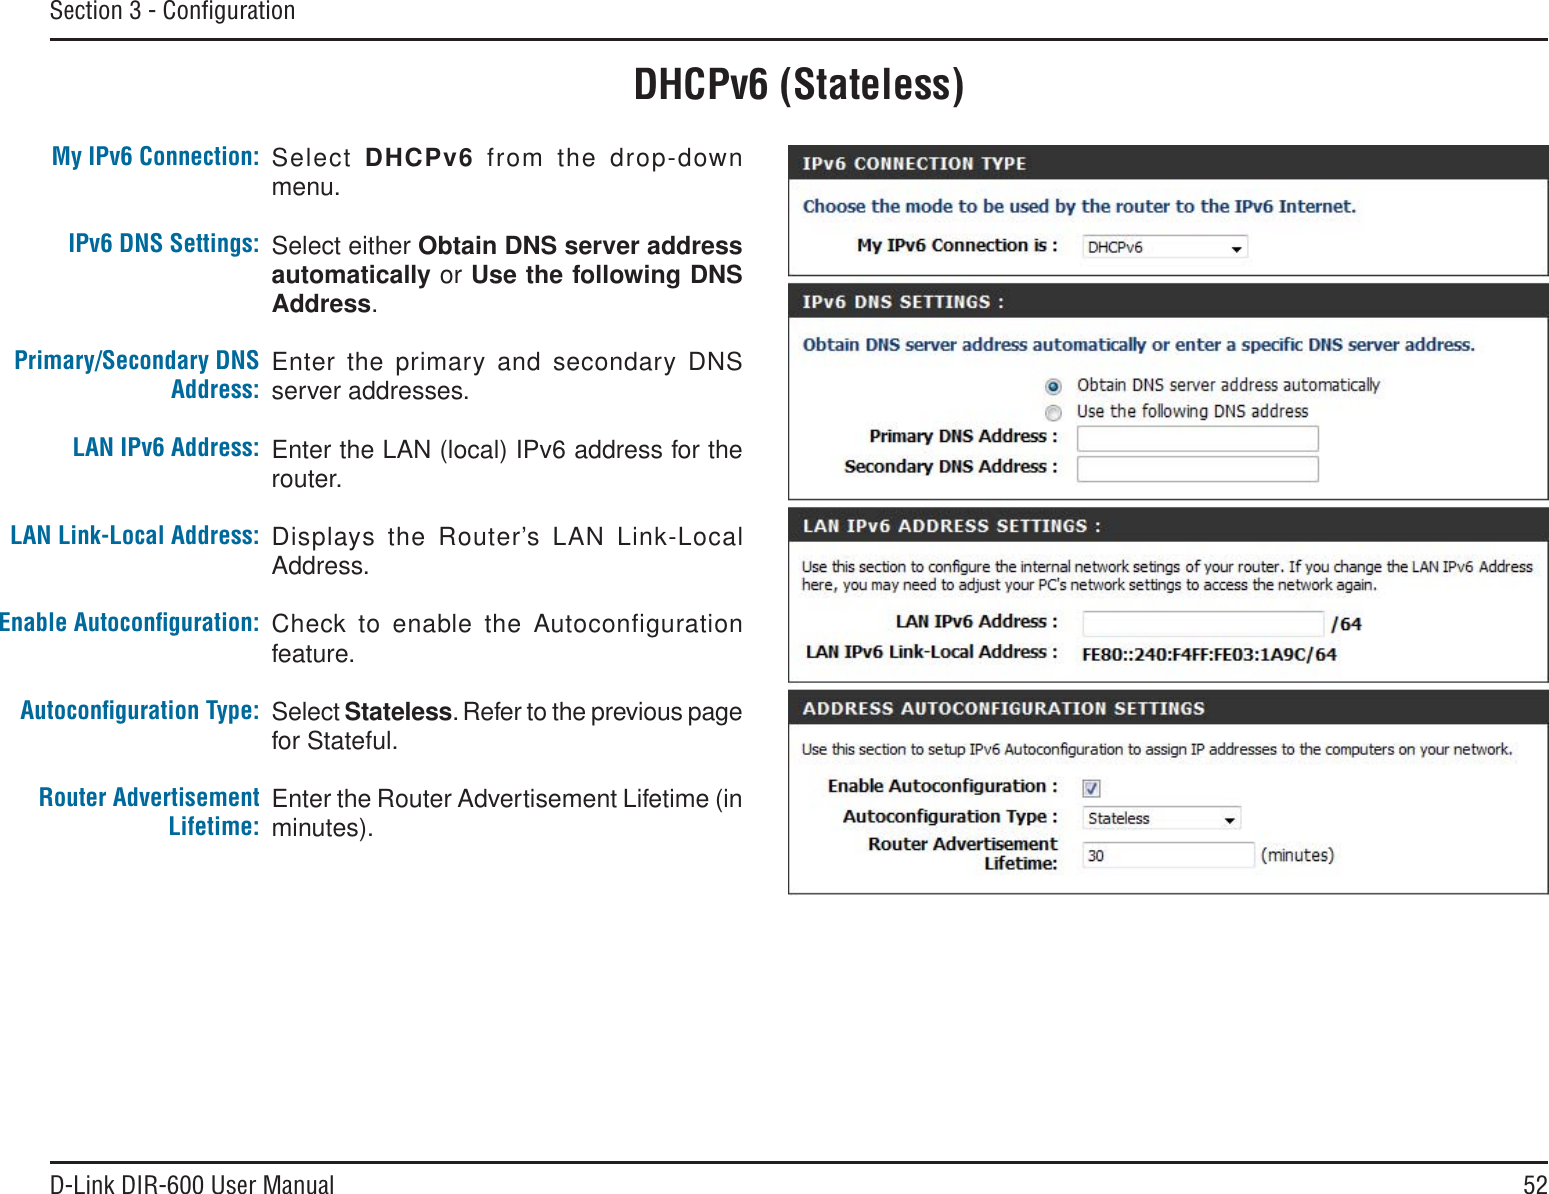 52D-Link DIR-600 User ManualSection 3 - ConﬁgurationDHCPv6 (Stateless)Select DHCPv6 from the drop-down menu.Select either Obtain DNS server addressautomatically or Use the following DNSAddress.Enter the primary and secondary DNS server addresses. Enter the LAN (local) IPv6 address for the router. Displays the Router’s LAN Link-Local Address.Check to enable the Autoconfiguration feature.Select Stateless. Refer to the previous page for Stateful.Enter the Router Advertisement Lifetime (in minutes).My IPv6 Connection:IPv6 DNS Settings:Primary/Secondary DNS Address:LAN IPv6 Address:LAN Link-Local Address:Enable Autoconﬁguration:Autoconﬁguration Type:Router Advertisement  Lifetime: